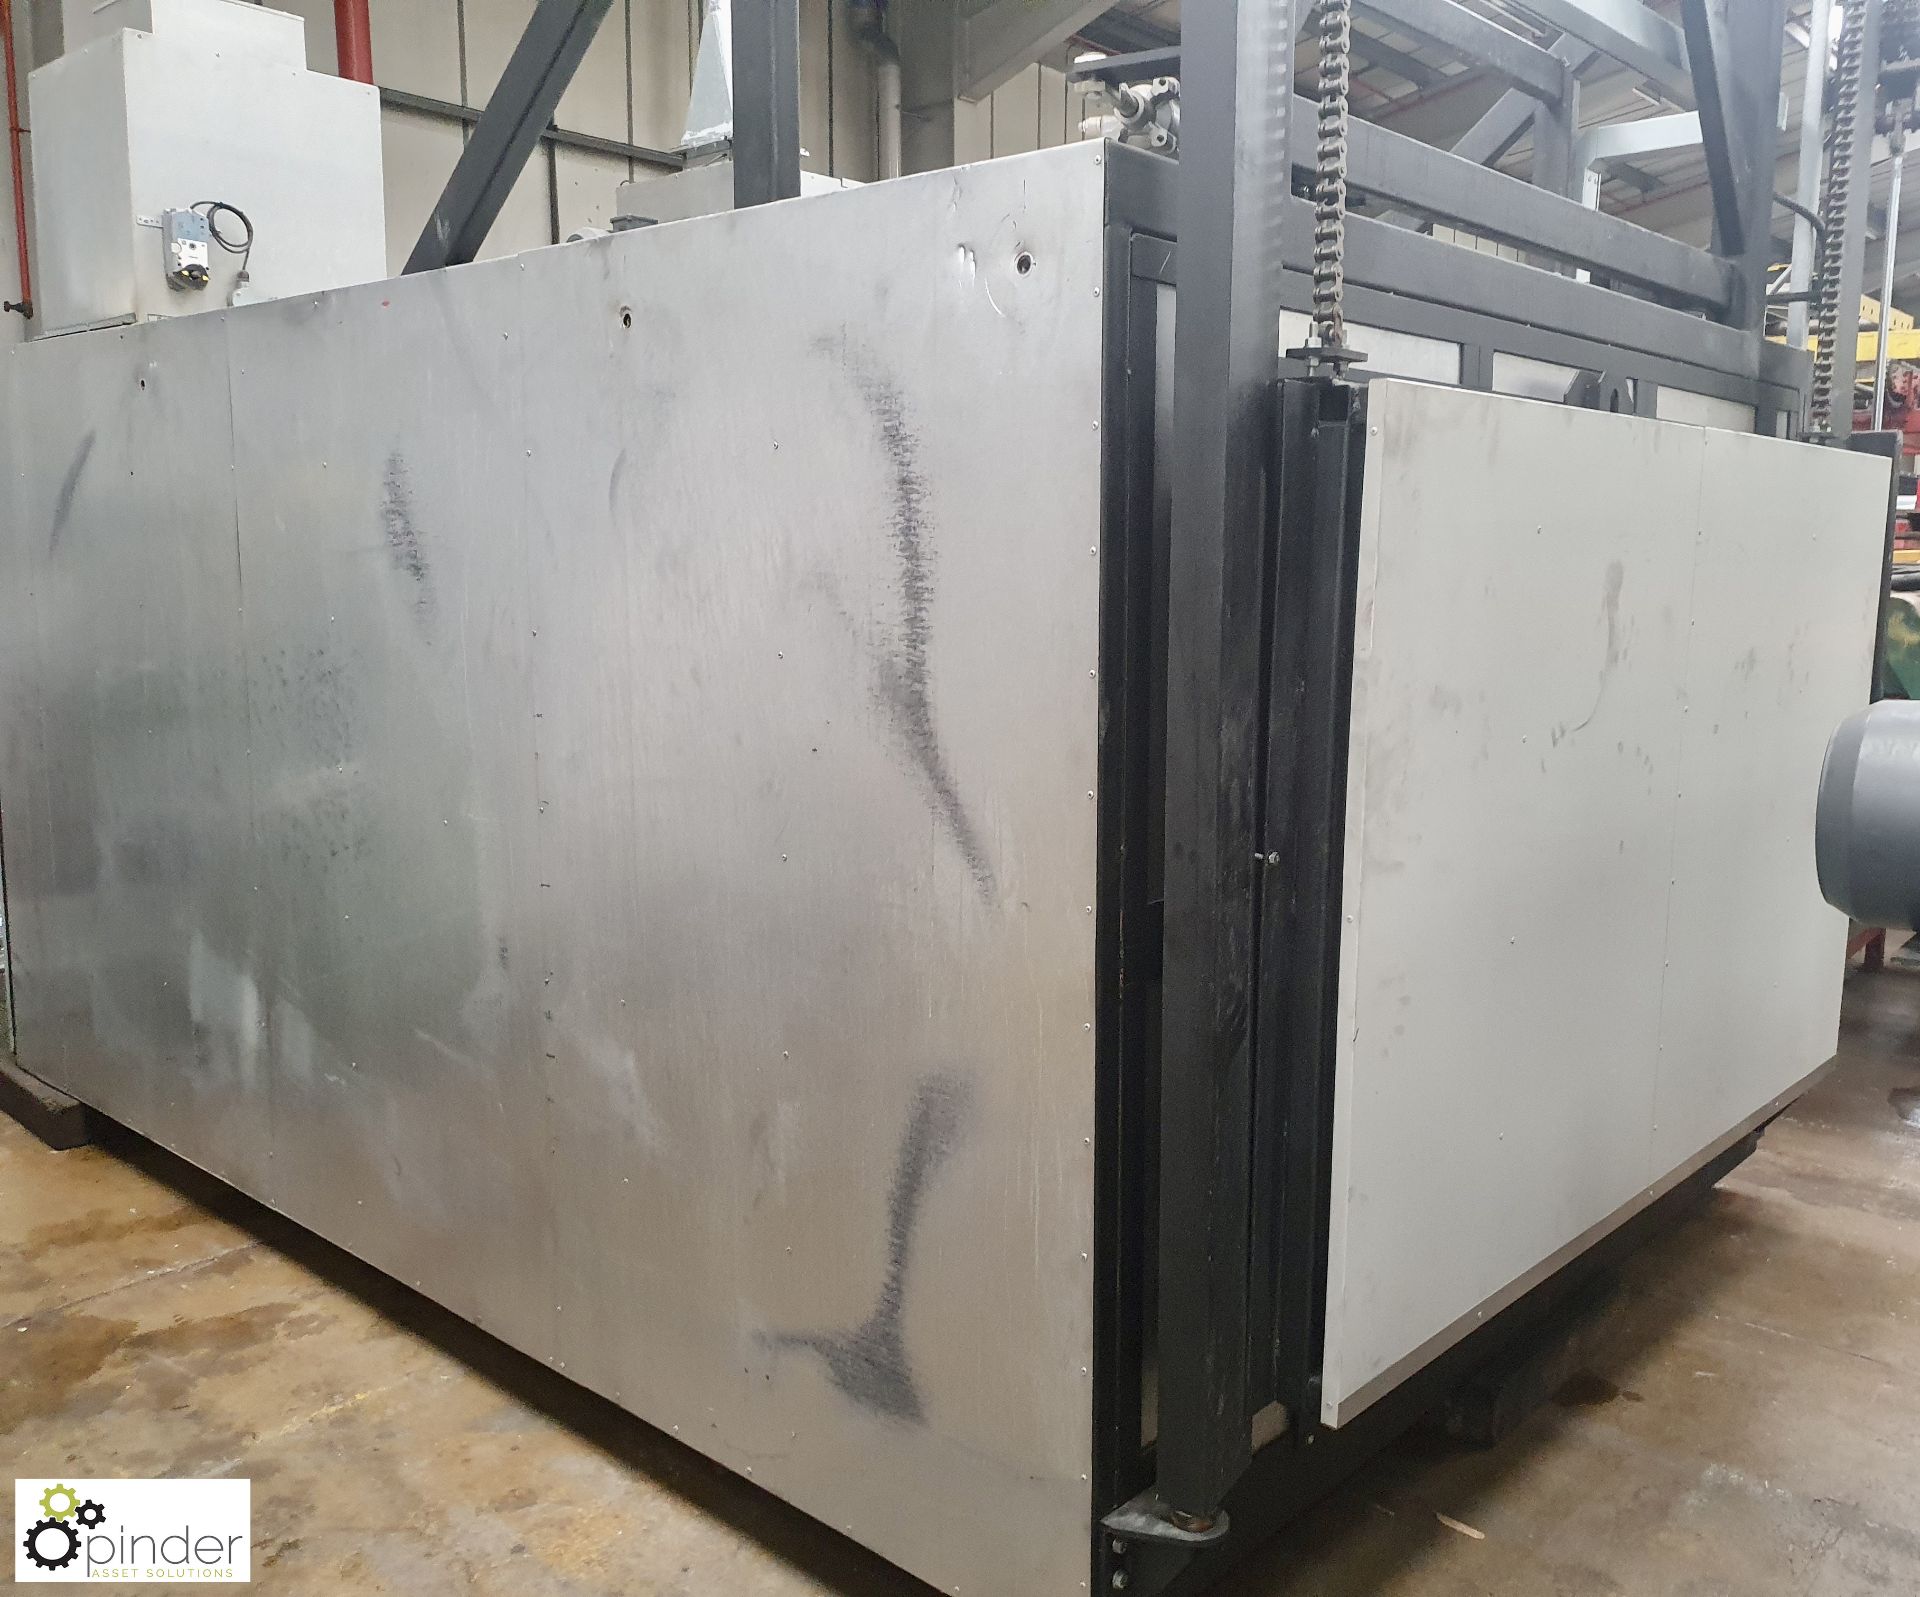 Caltherm Paint Oven freestanding medium sized gas fired Box Oven, year 2017, serial number - Image 7 of 15